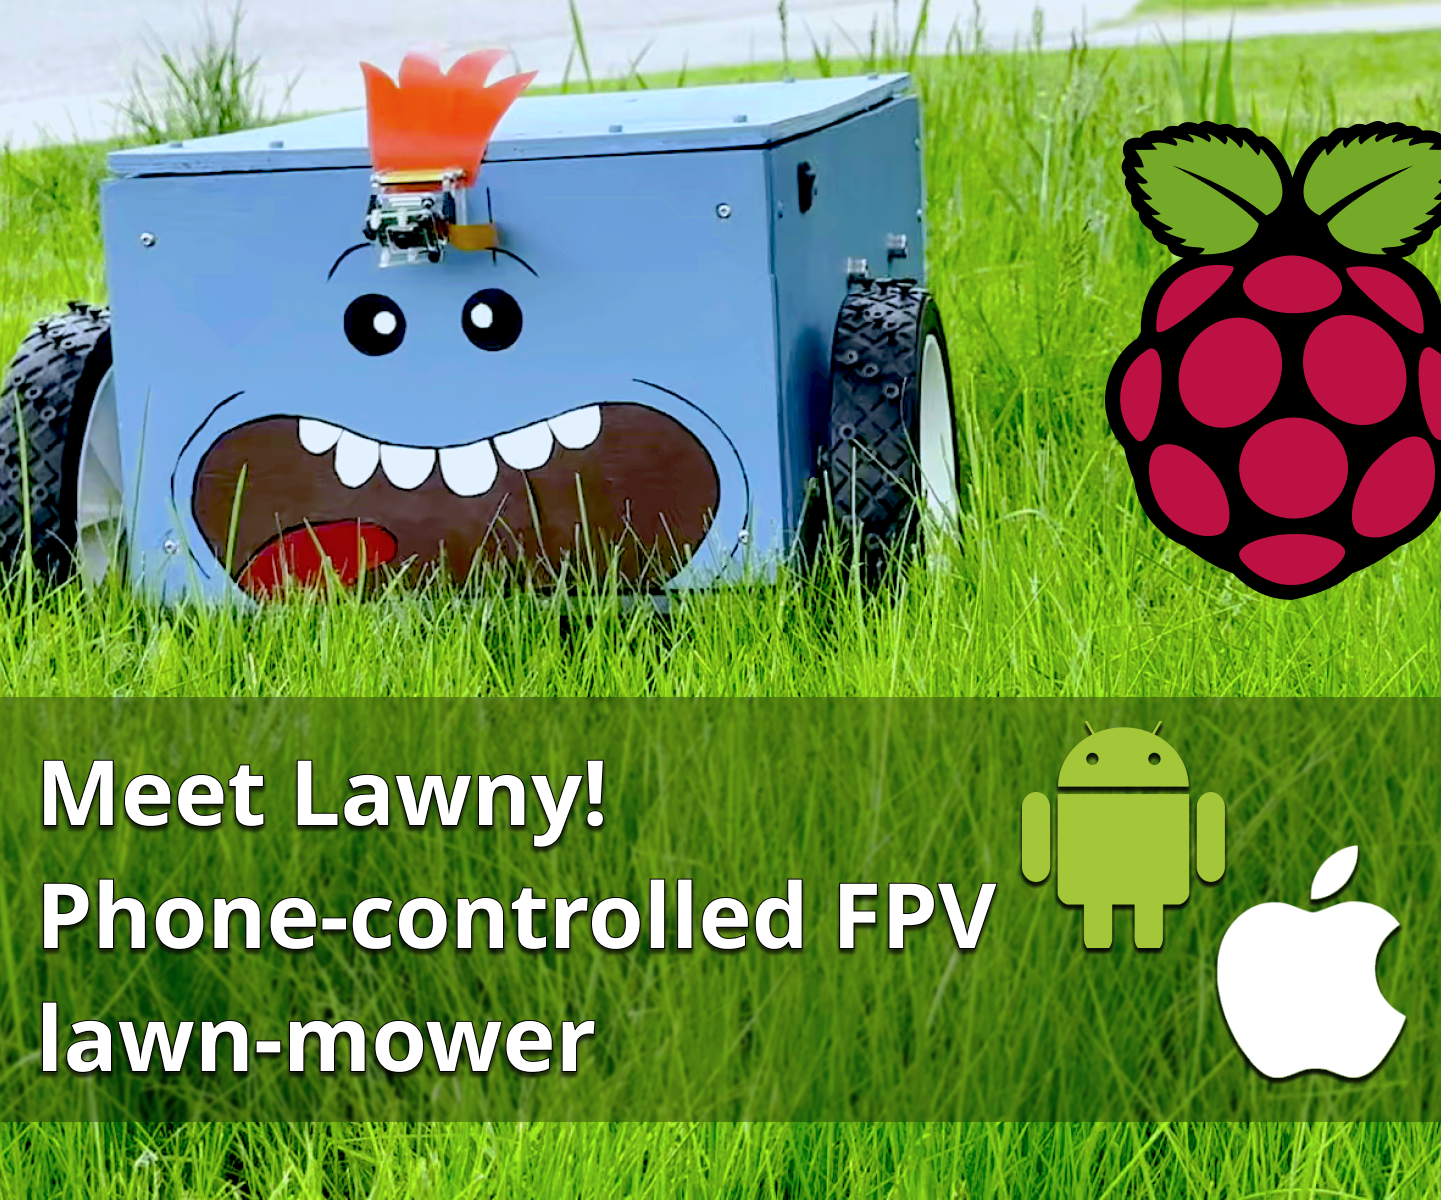 Raspberry PI-based, Phone-controlled, First-person-view Lawn-mower.